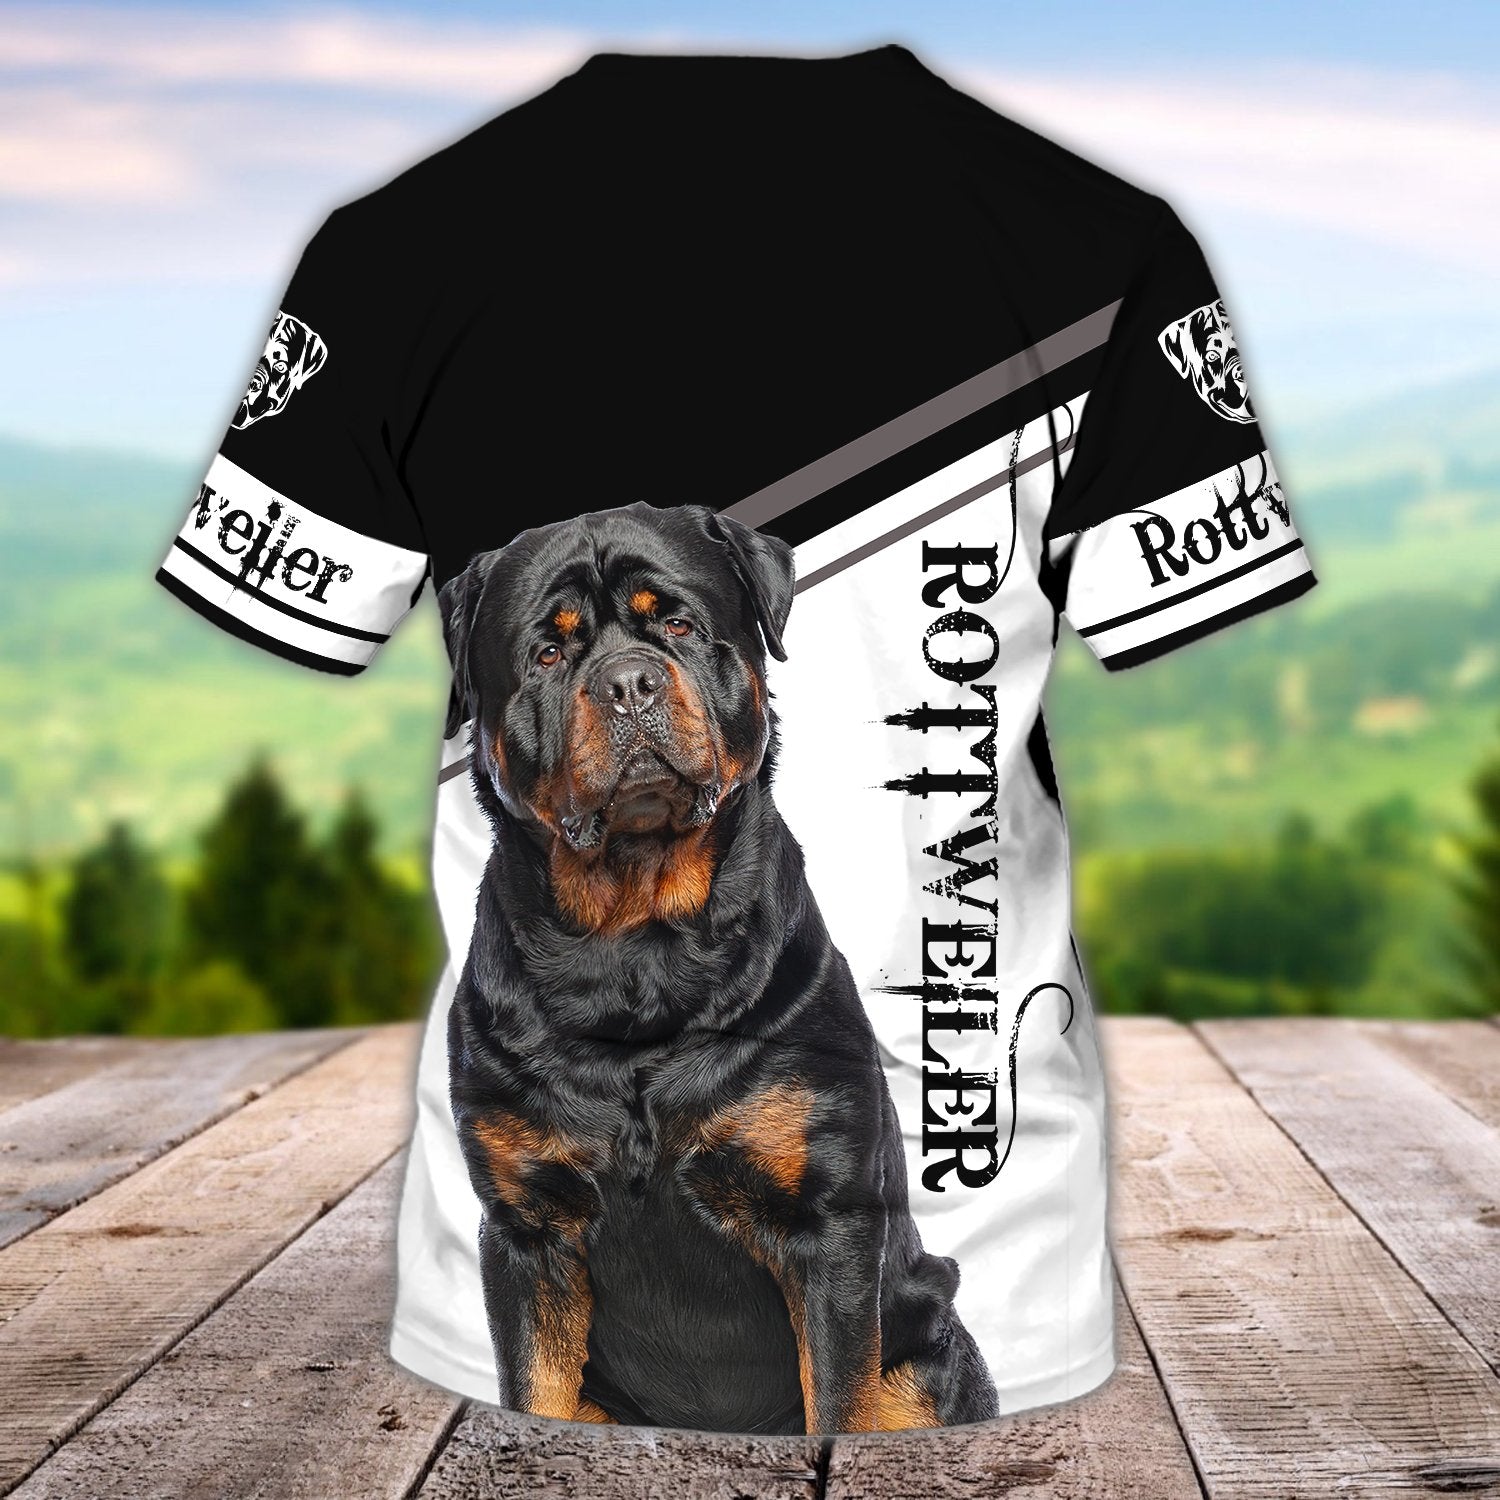 Personalized Name 3D Tshirt With Rottweiler/ Cute Rottweiler Dog Shirt For Men Women